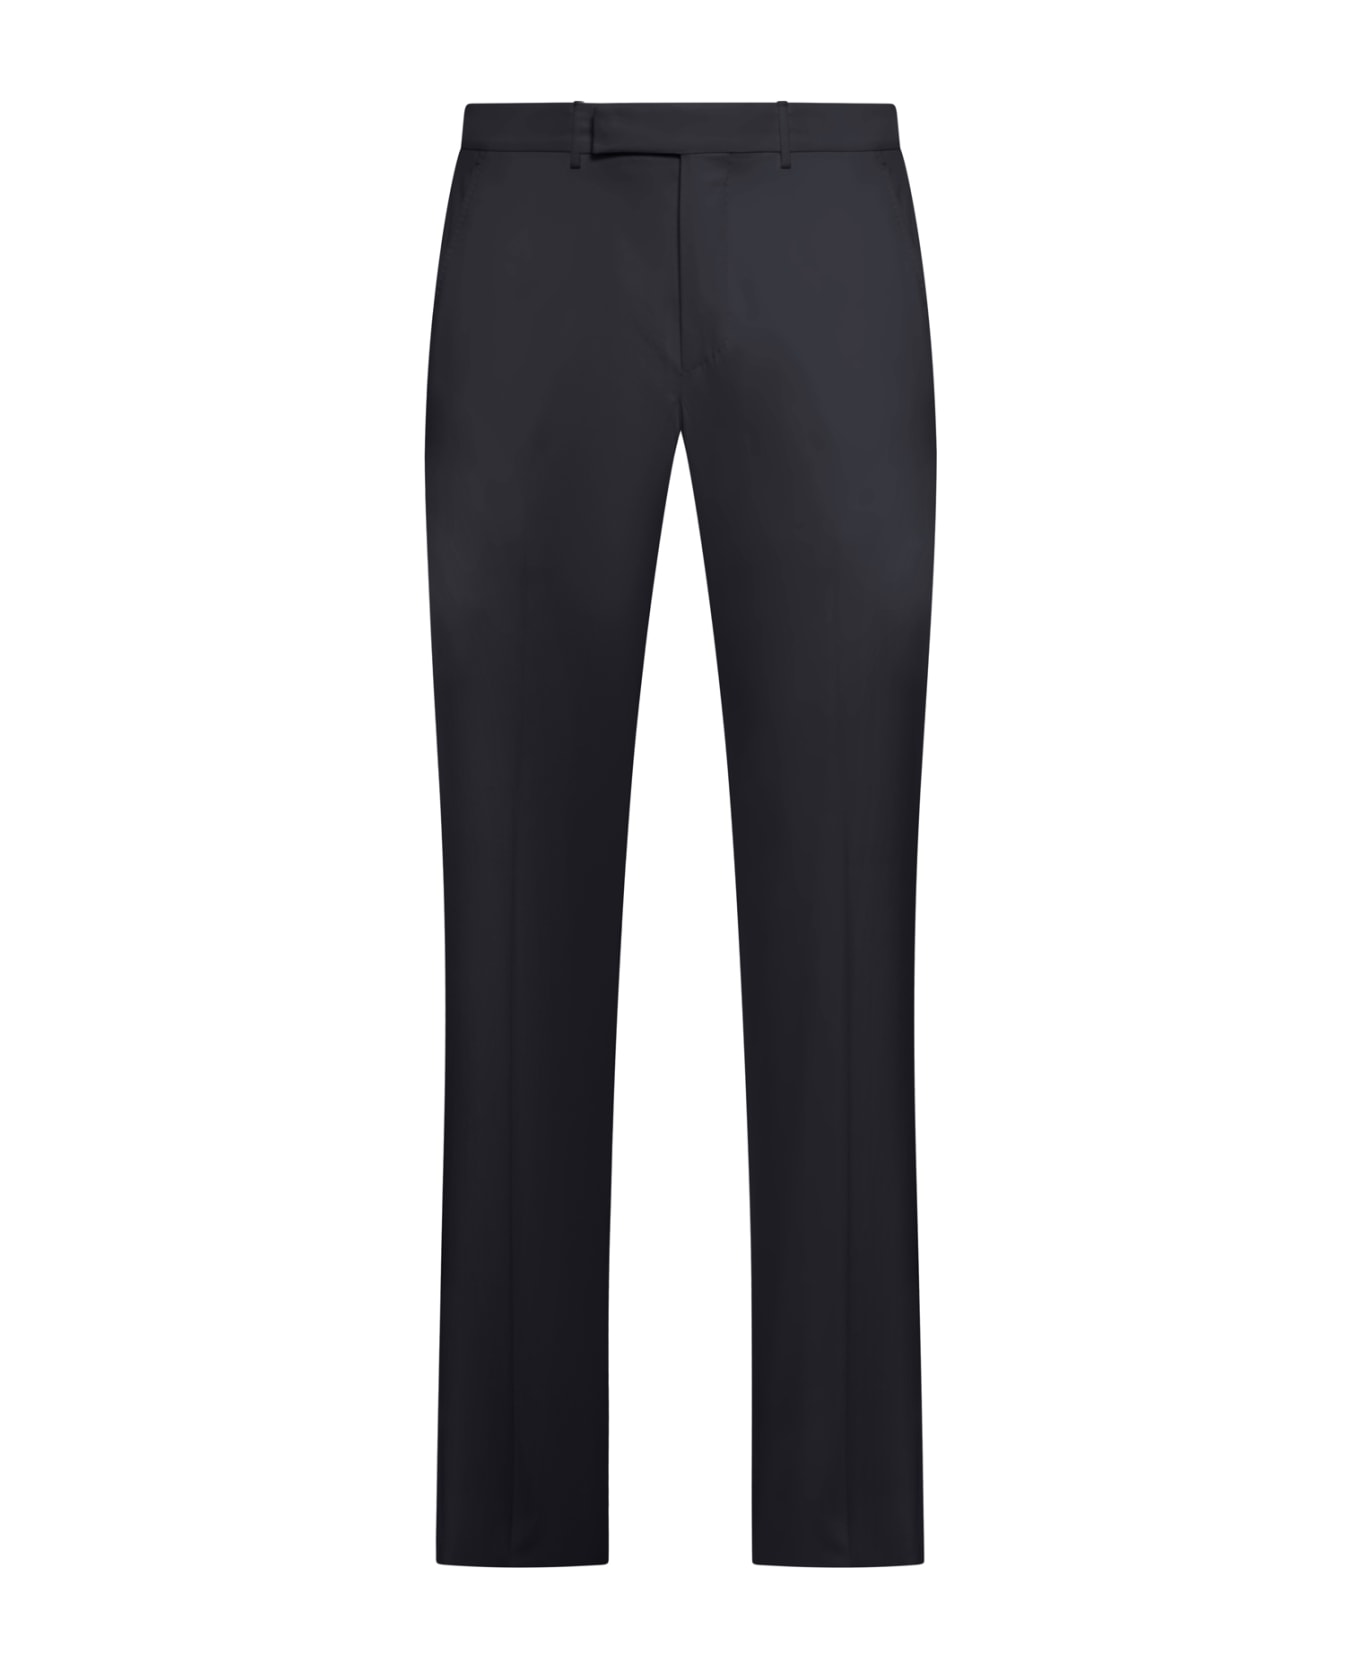 Zegna Trousers - Nvy Sld Navy